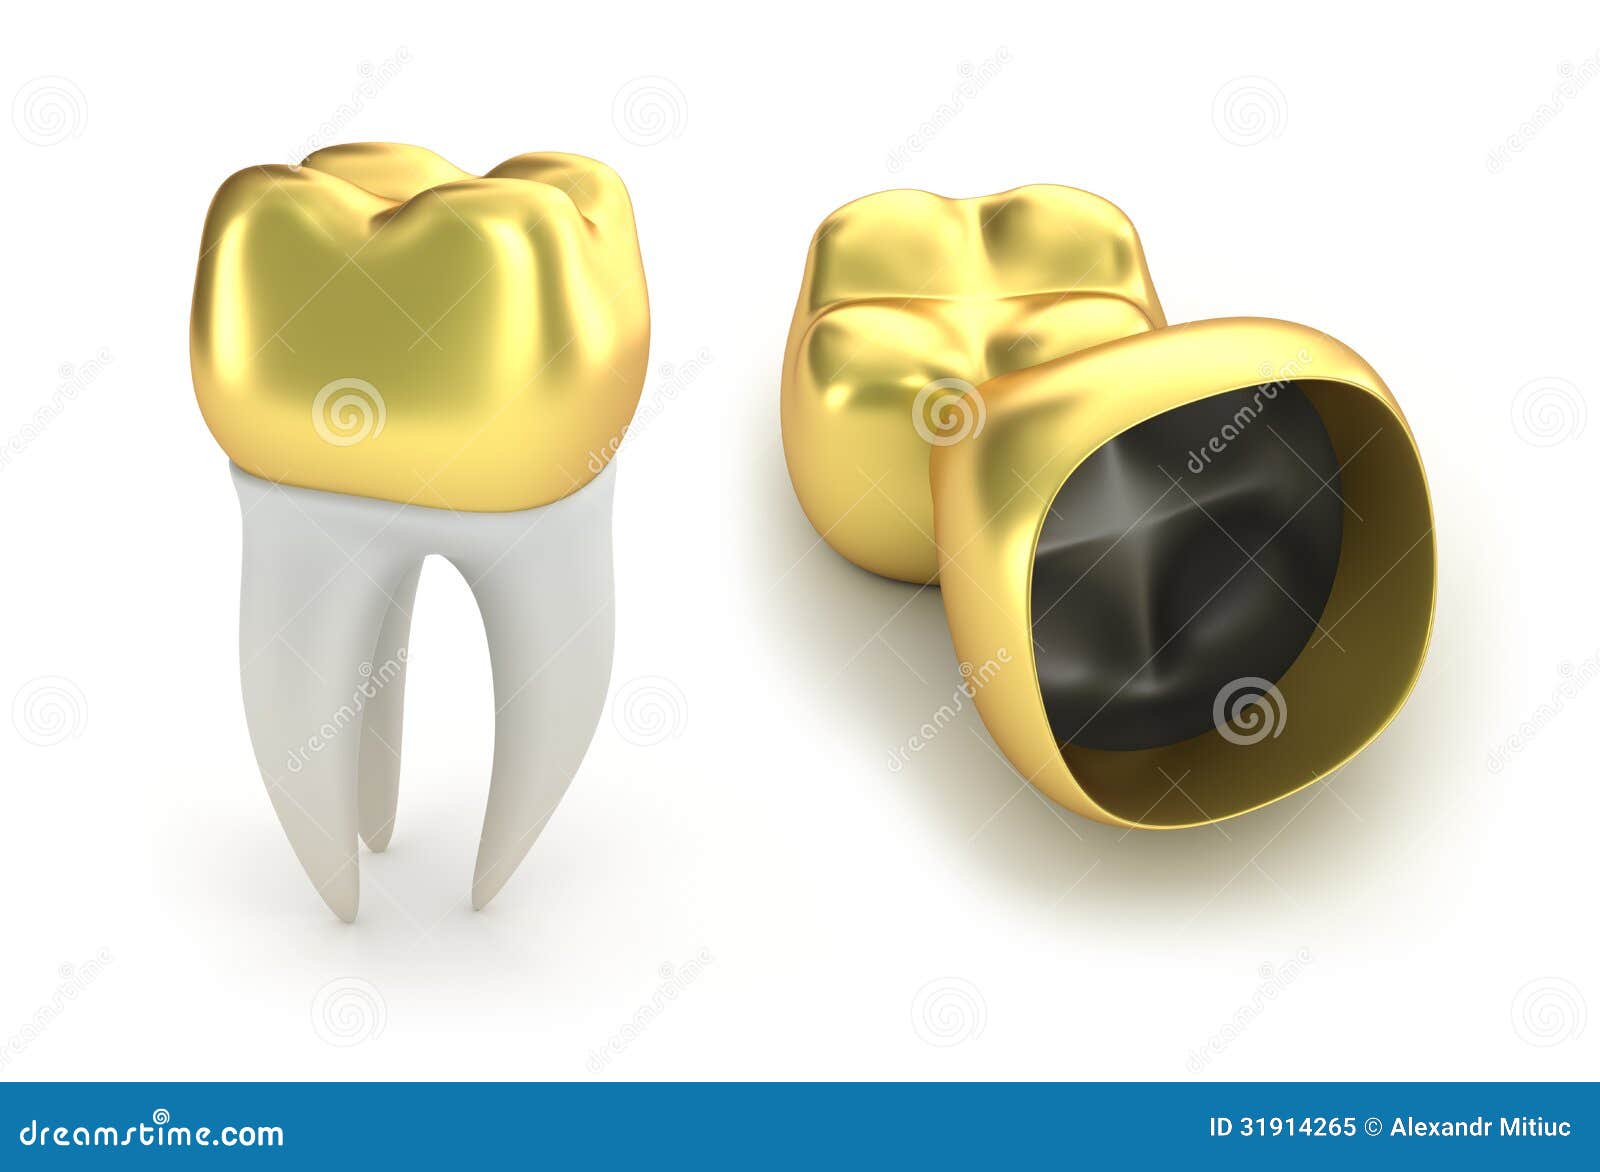 tooth crown clip art - photo #29